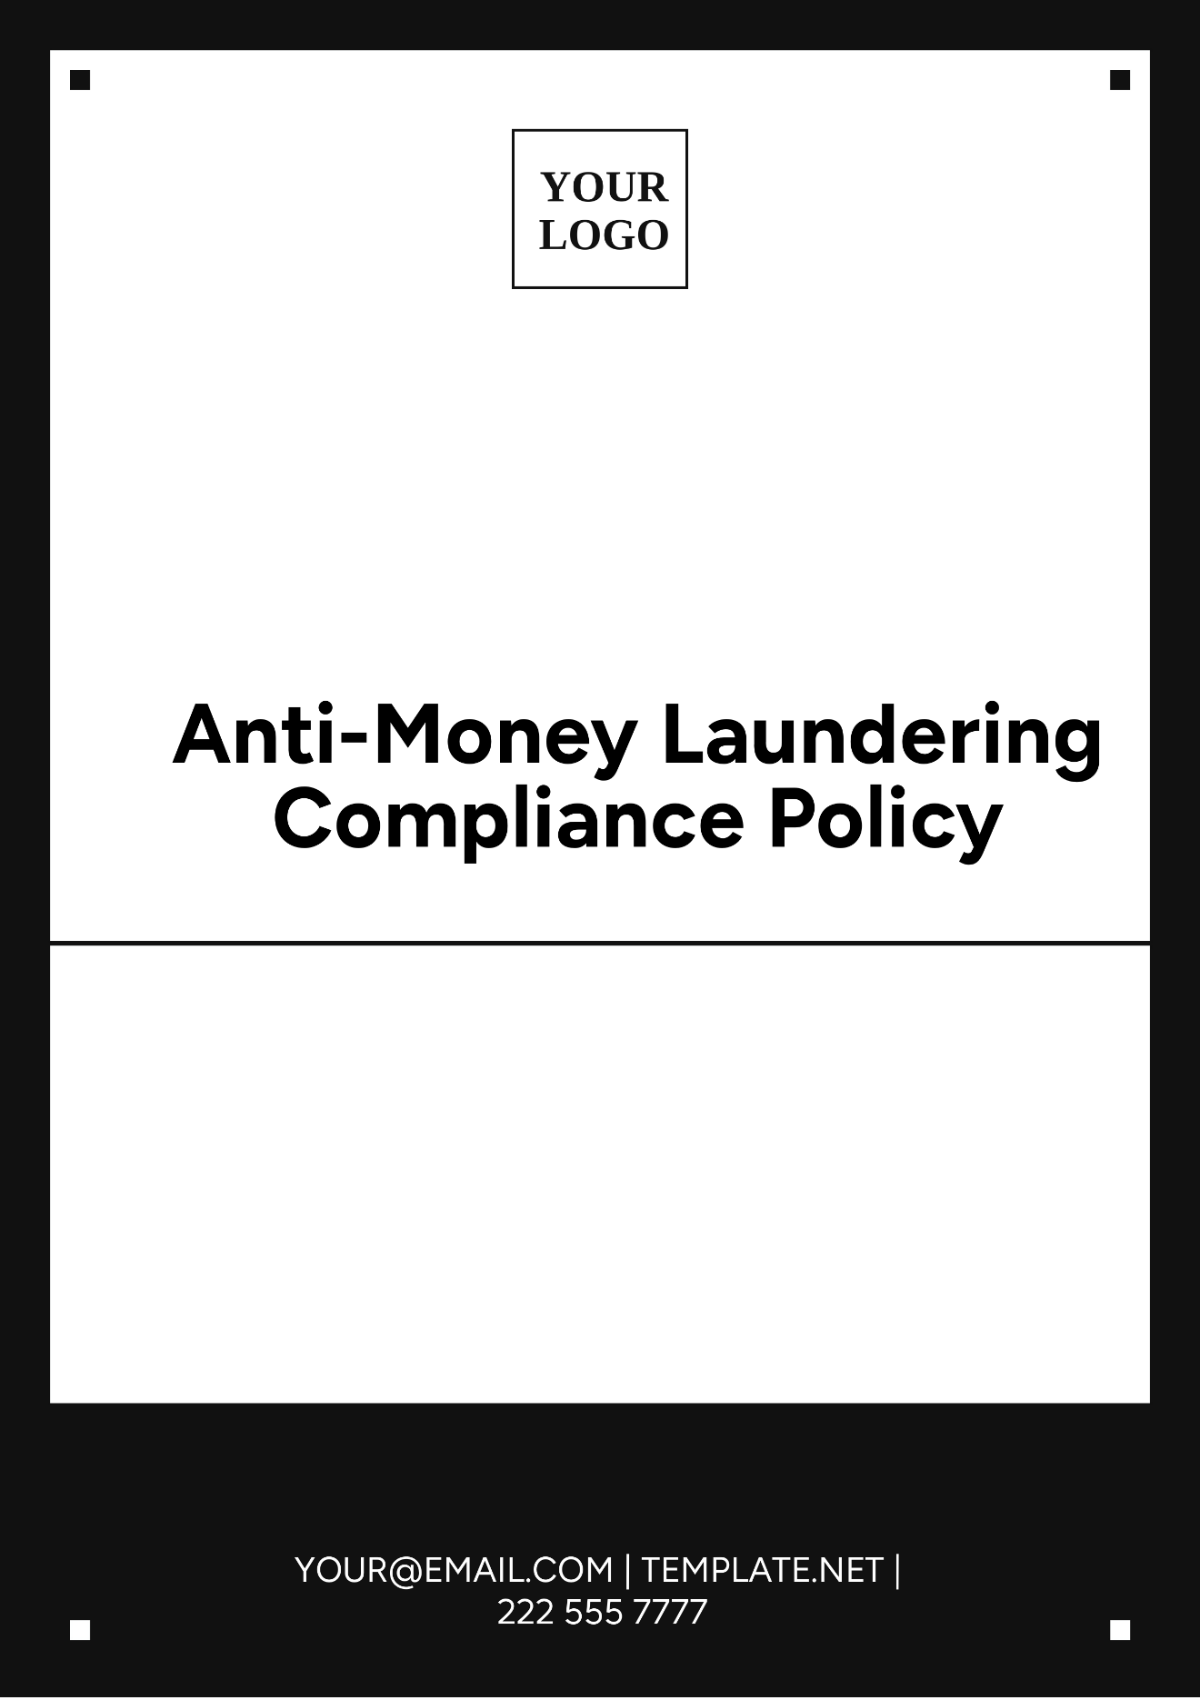 Anti-Money Laundering Compliance Policy Template